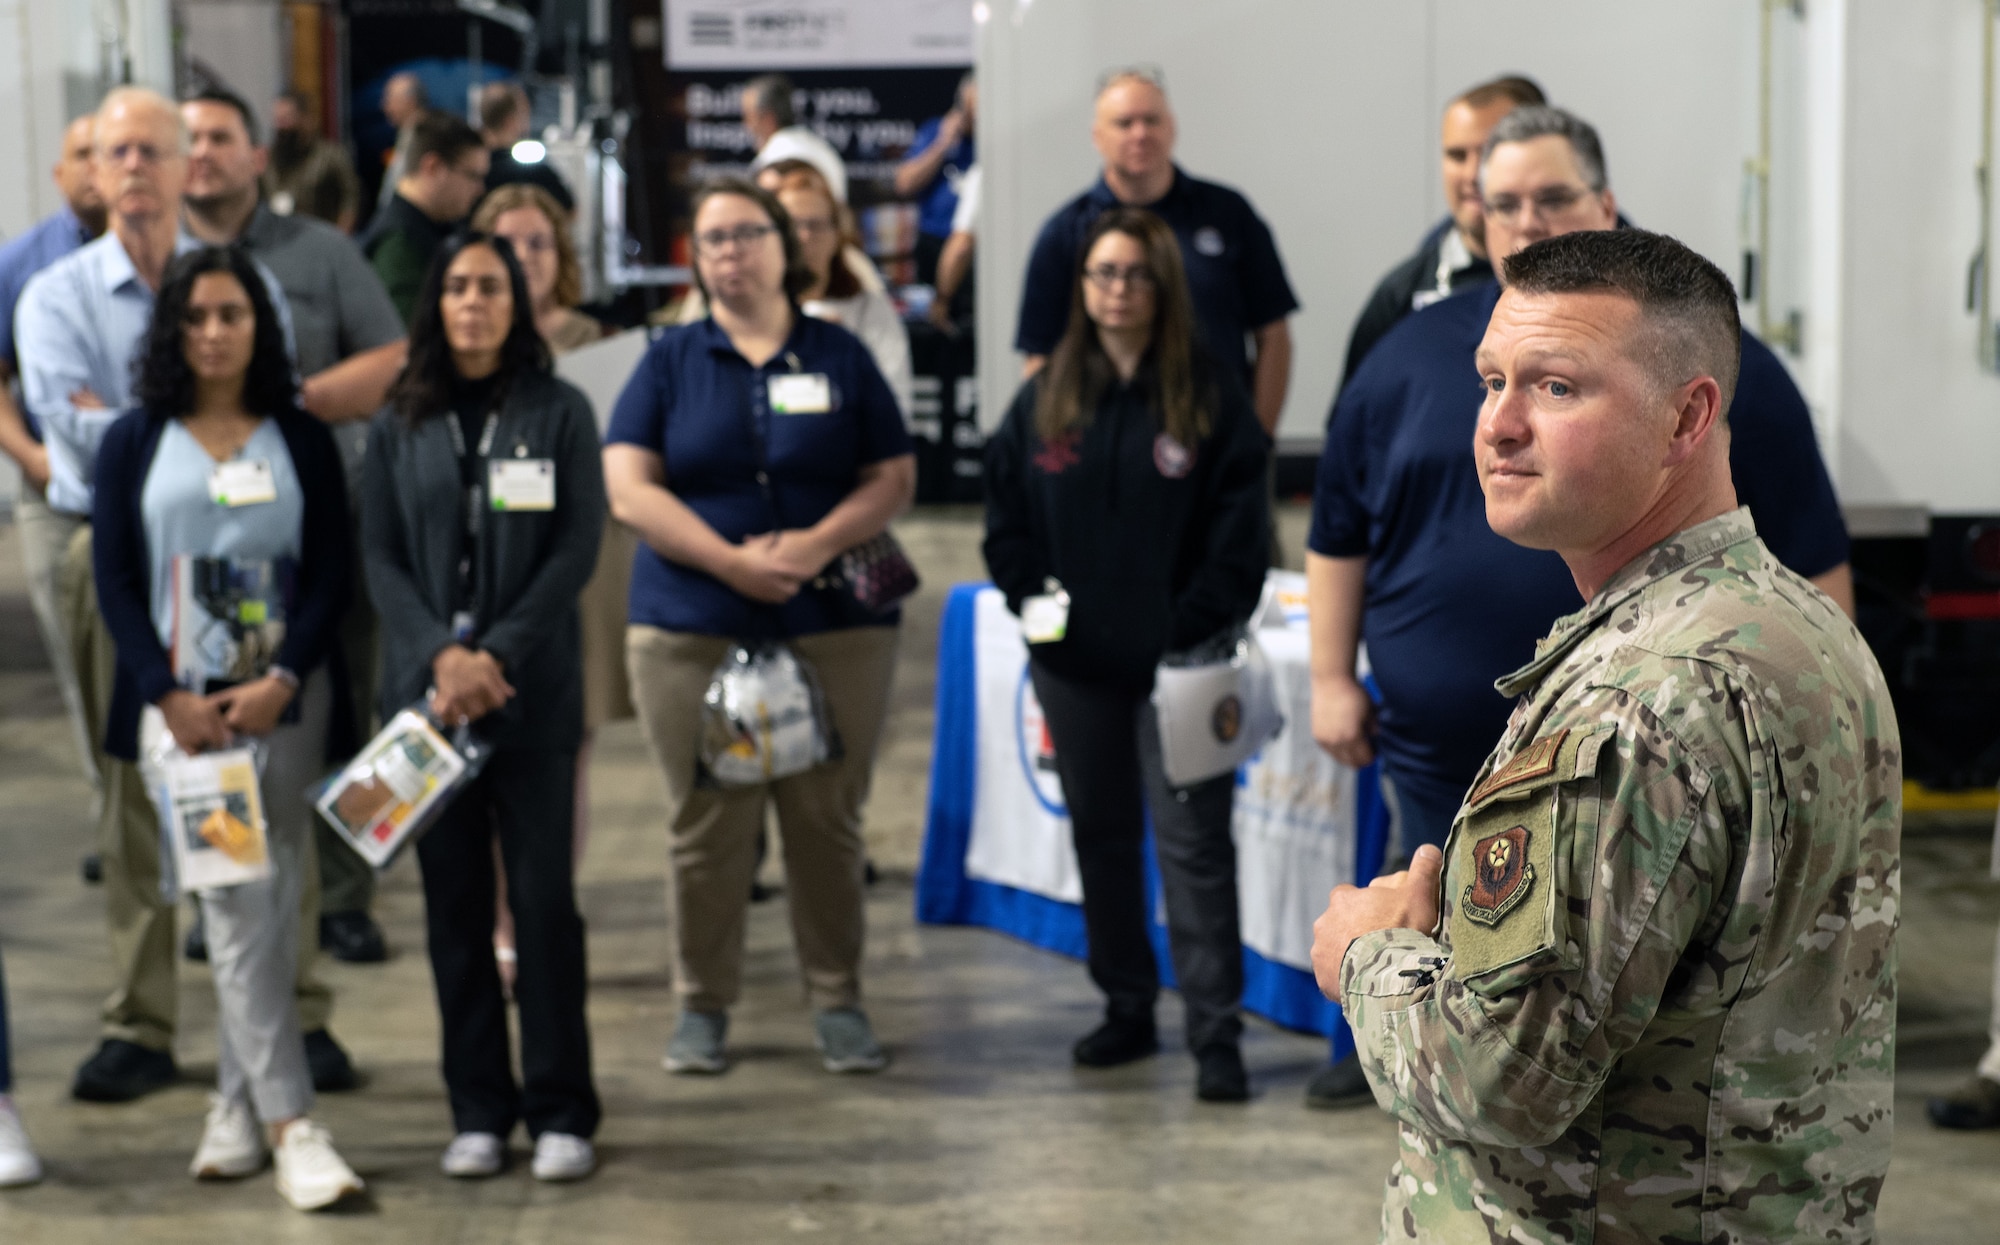 Airmen and Soldiers from the 3rd CBRN Task Force and 3rd Civil Support Team, Pennsylvania National Guard, delivered a capabilities briefing to other emergency responders at the Pennsylvania Asset Review Expo May 10, 2023, at Bethlehem, Pennsylvania.